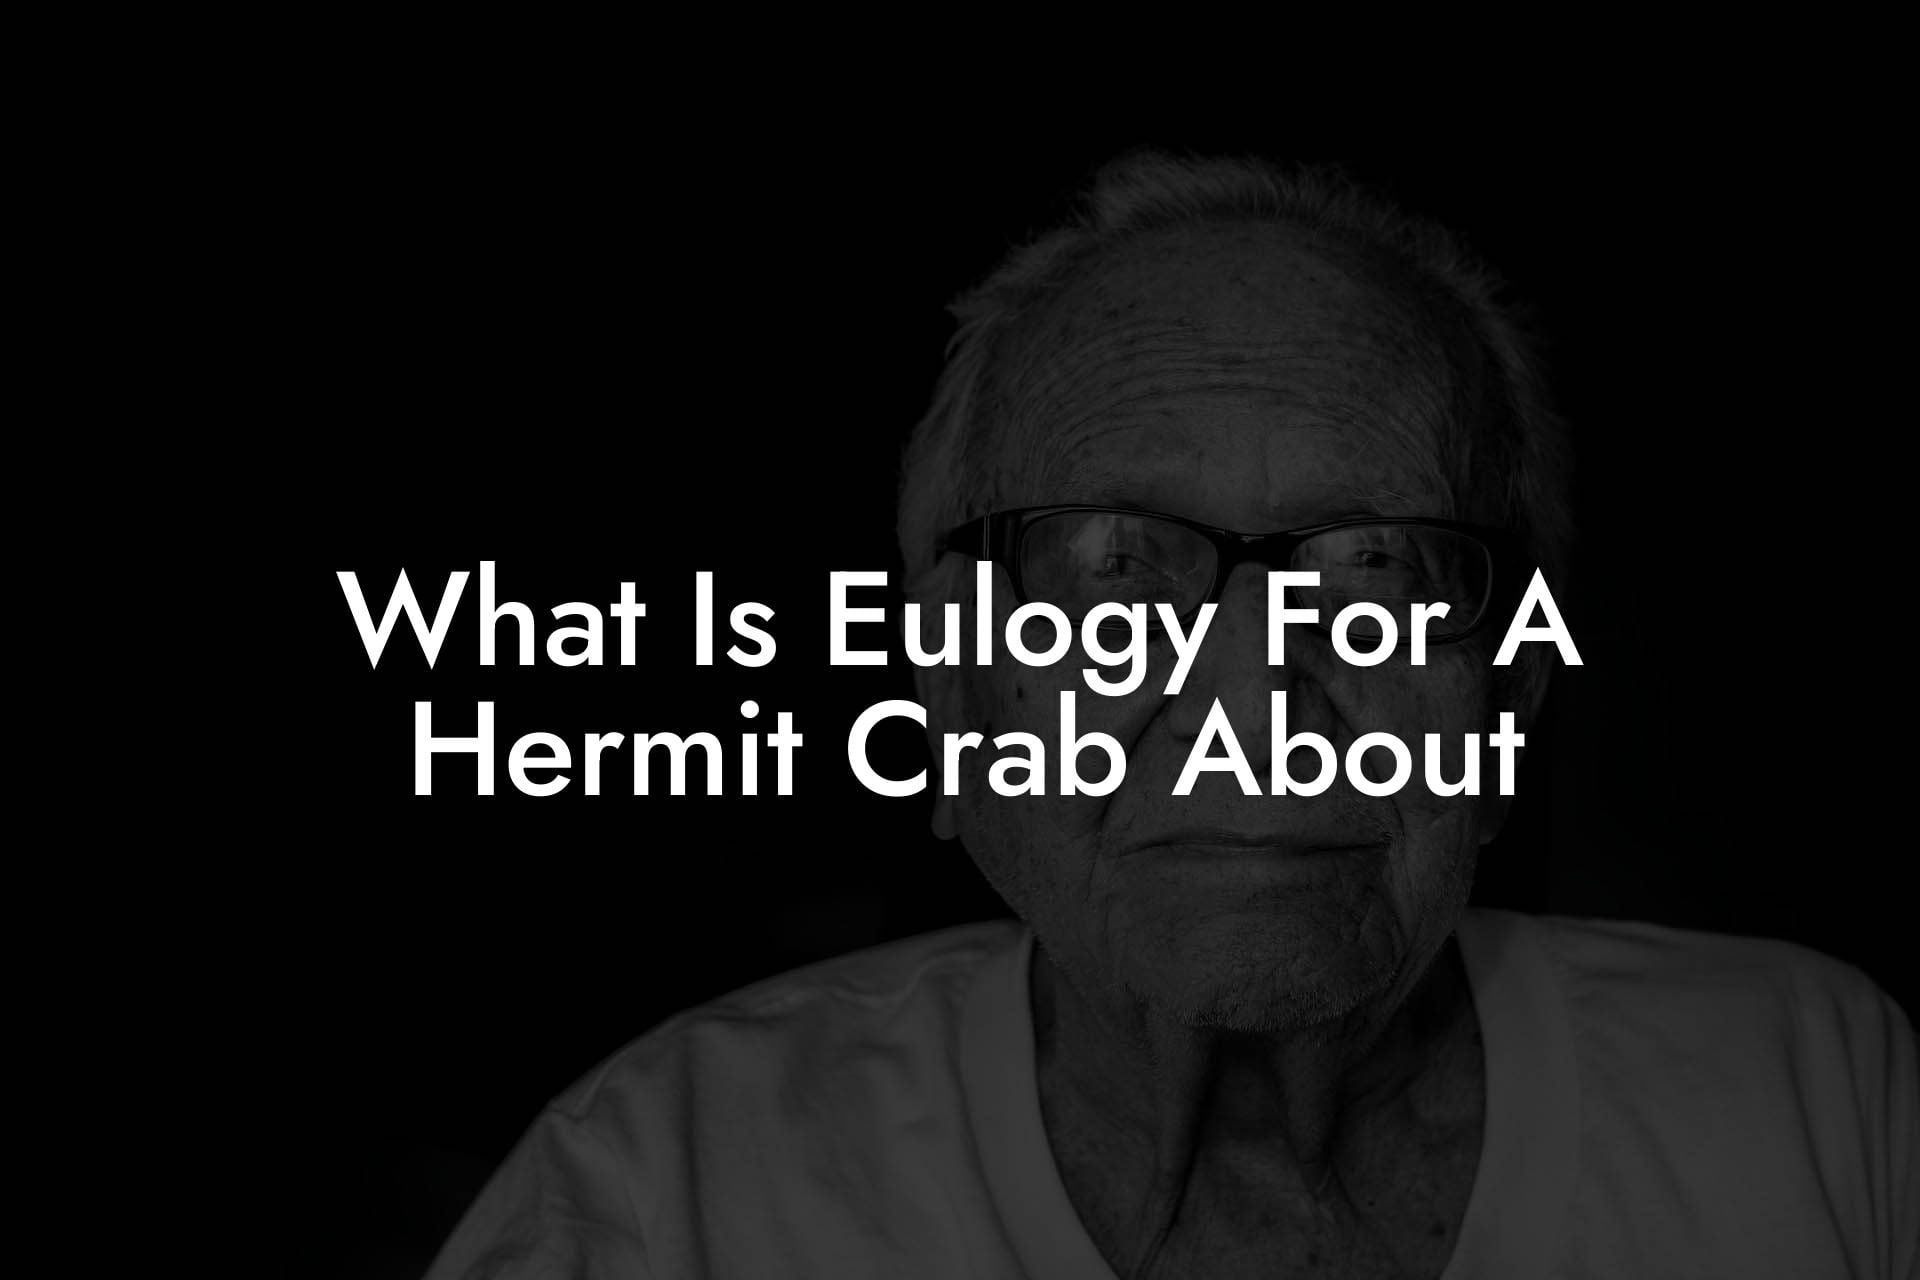 What Is Eulogy For A Hermit Crab About